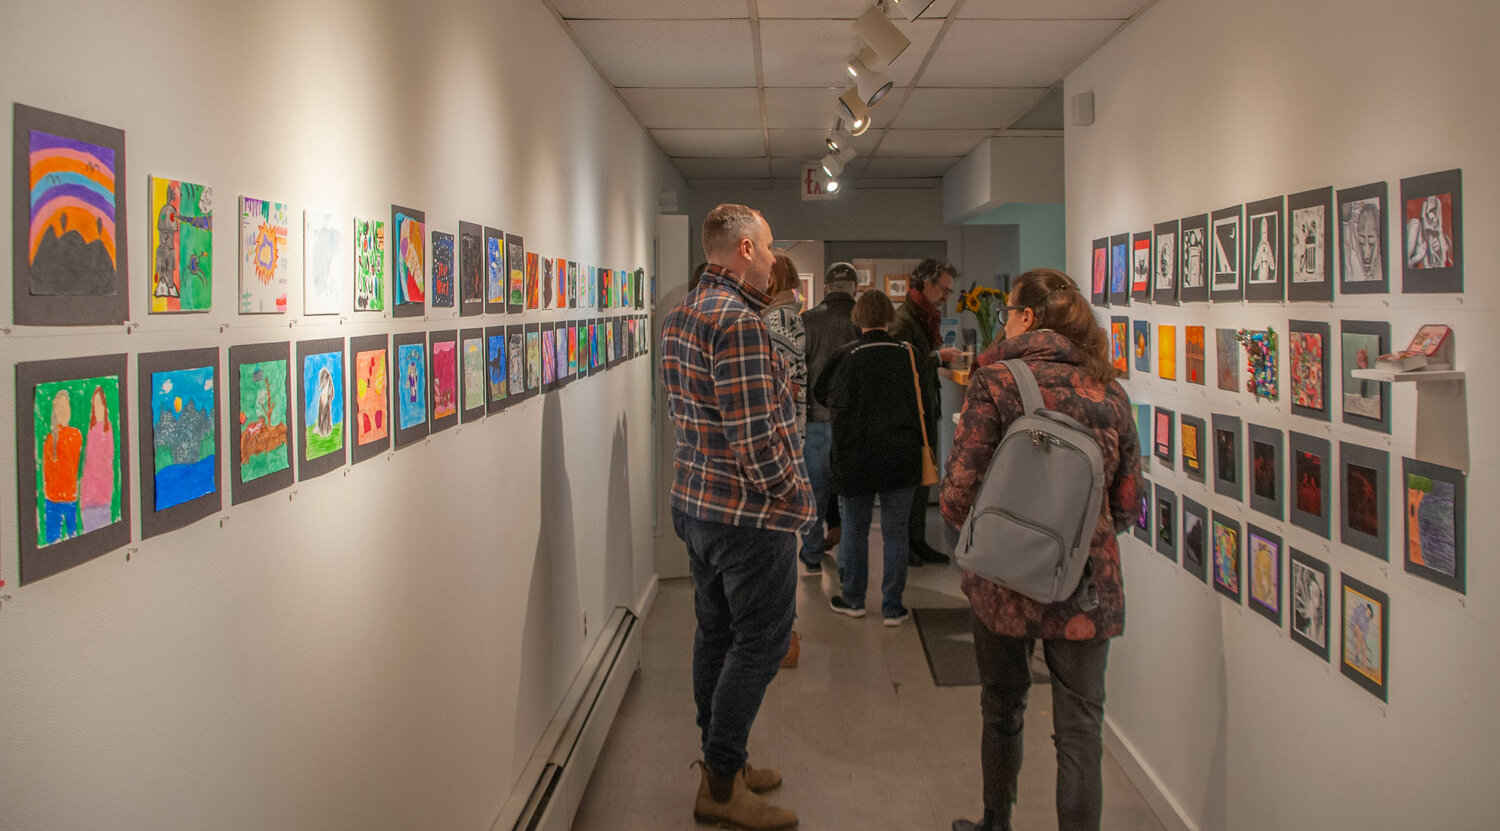 This year “mini-masters” (pre-K to grade 12) are participating and displaying more than 80 works at Art in Sixes at the DVAA in Narrowsburg, NY.